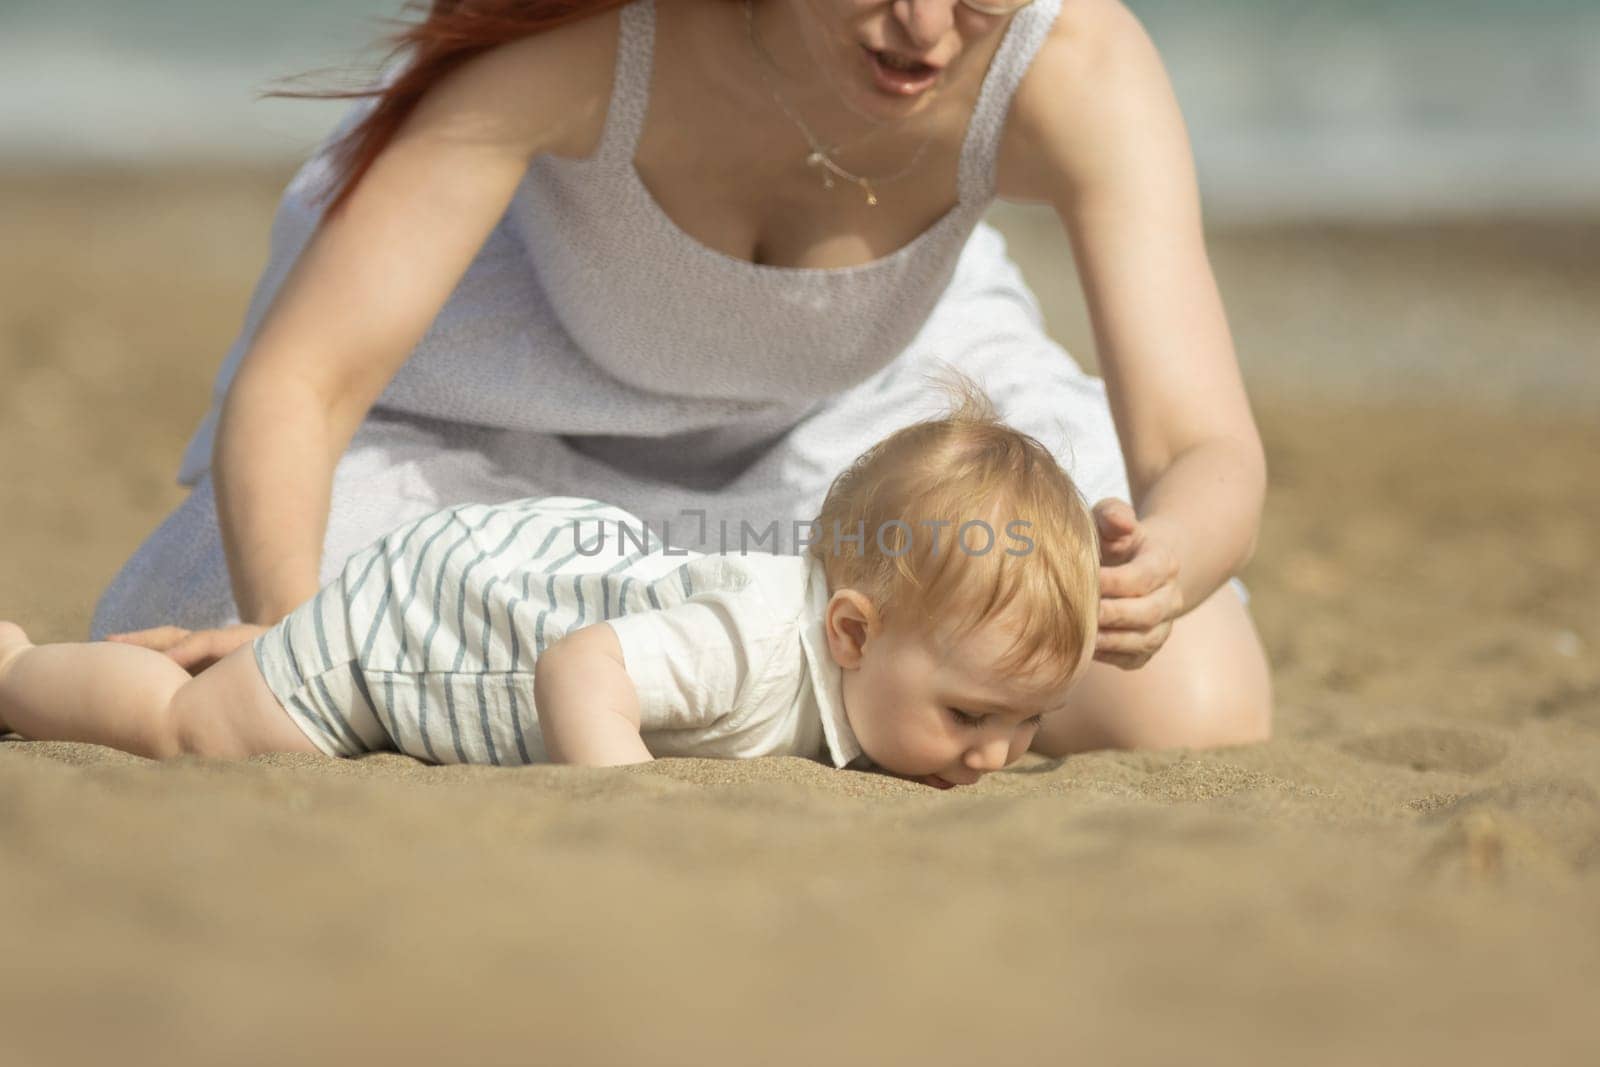 A little boy trying to eat the sand and his mother stopping him. Mid shot